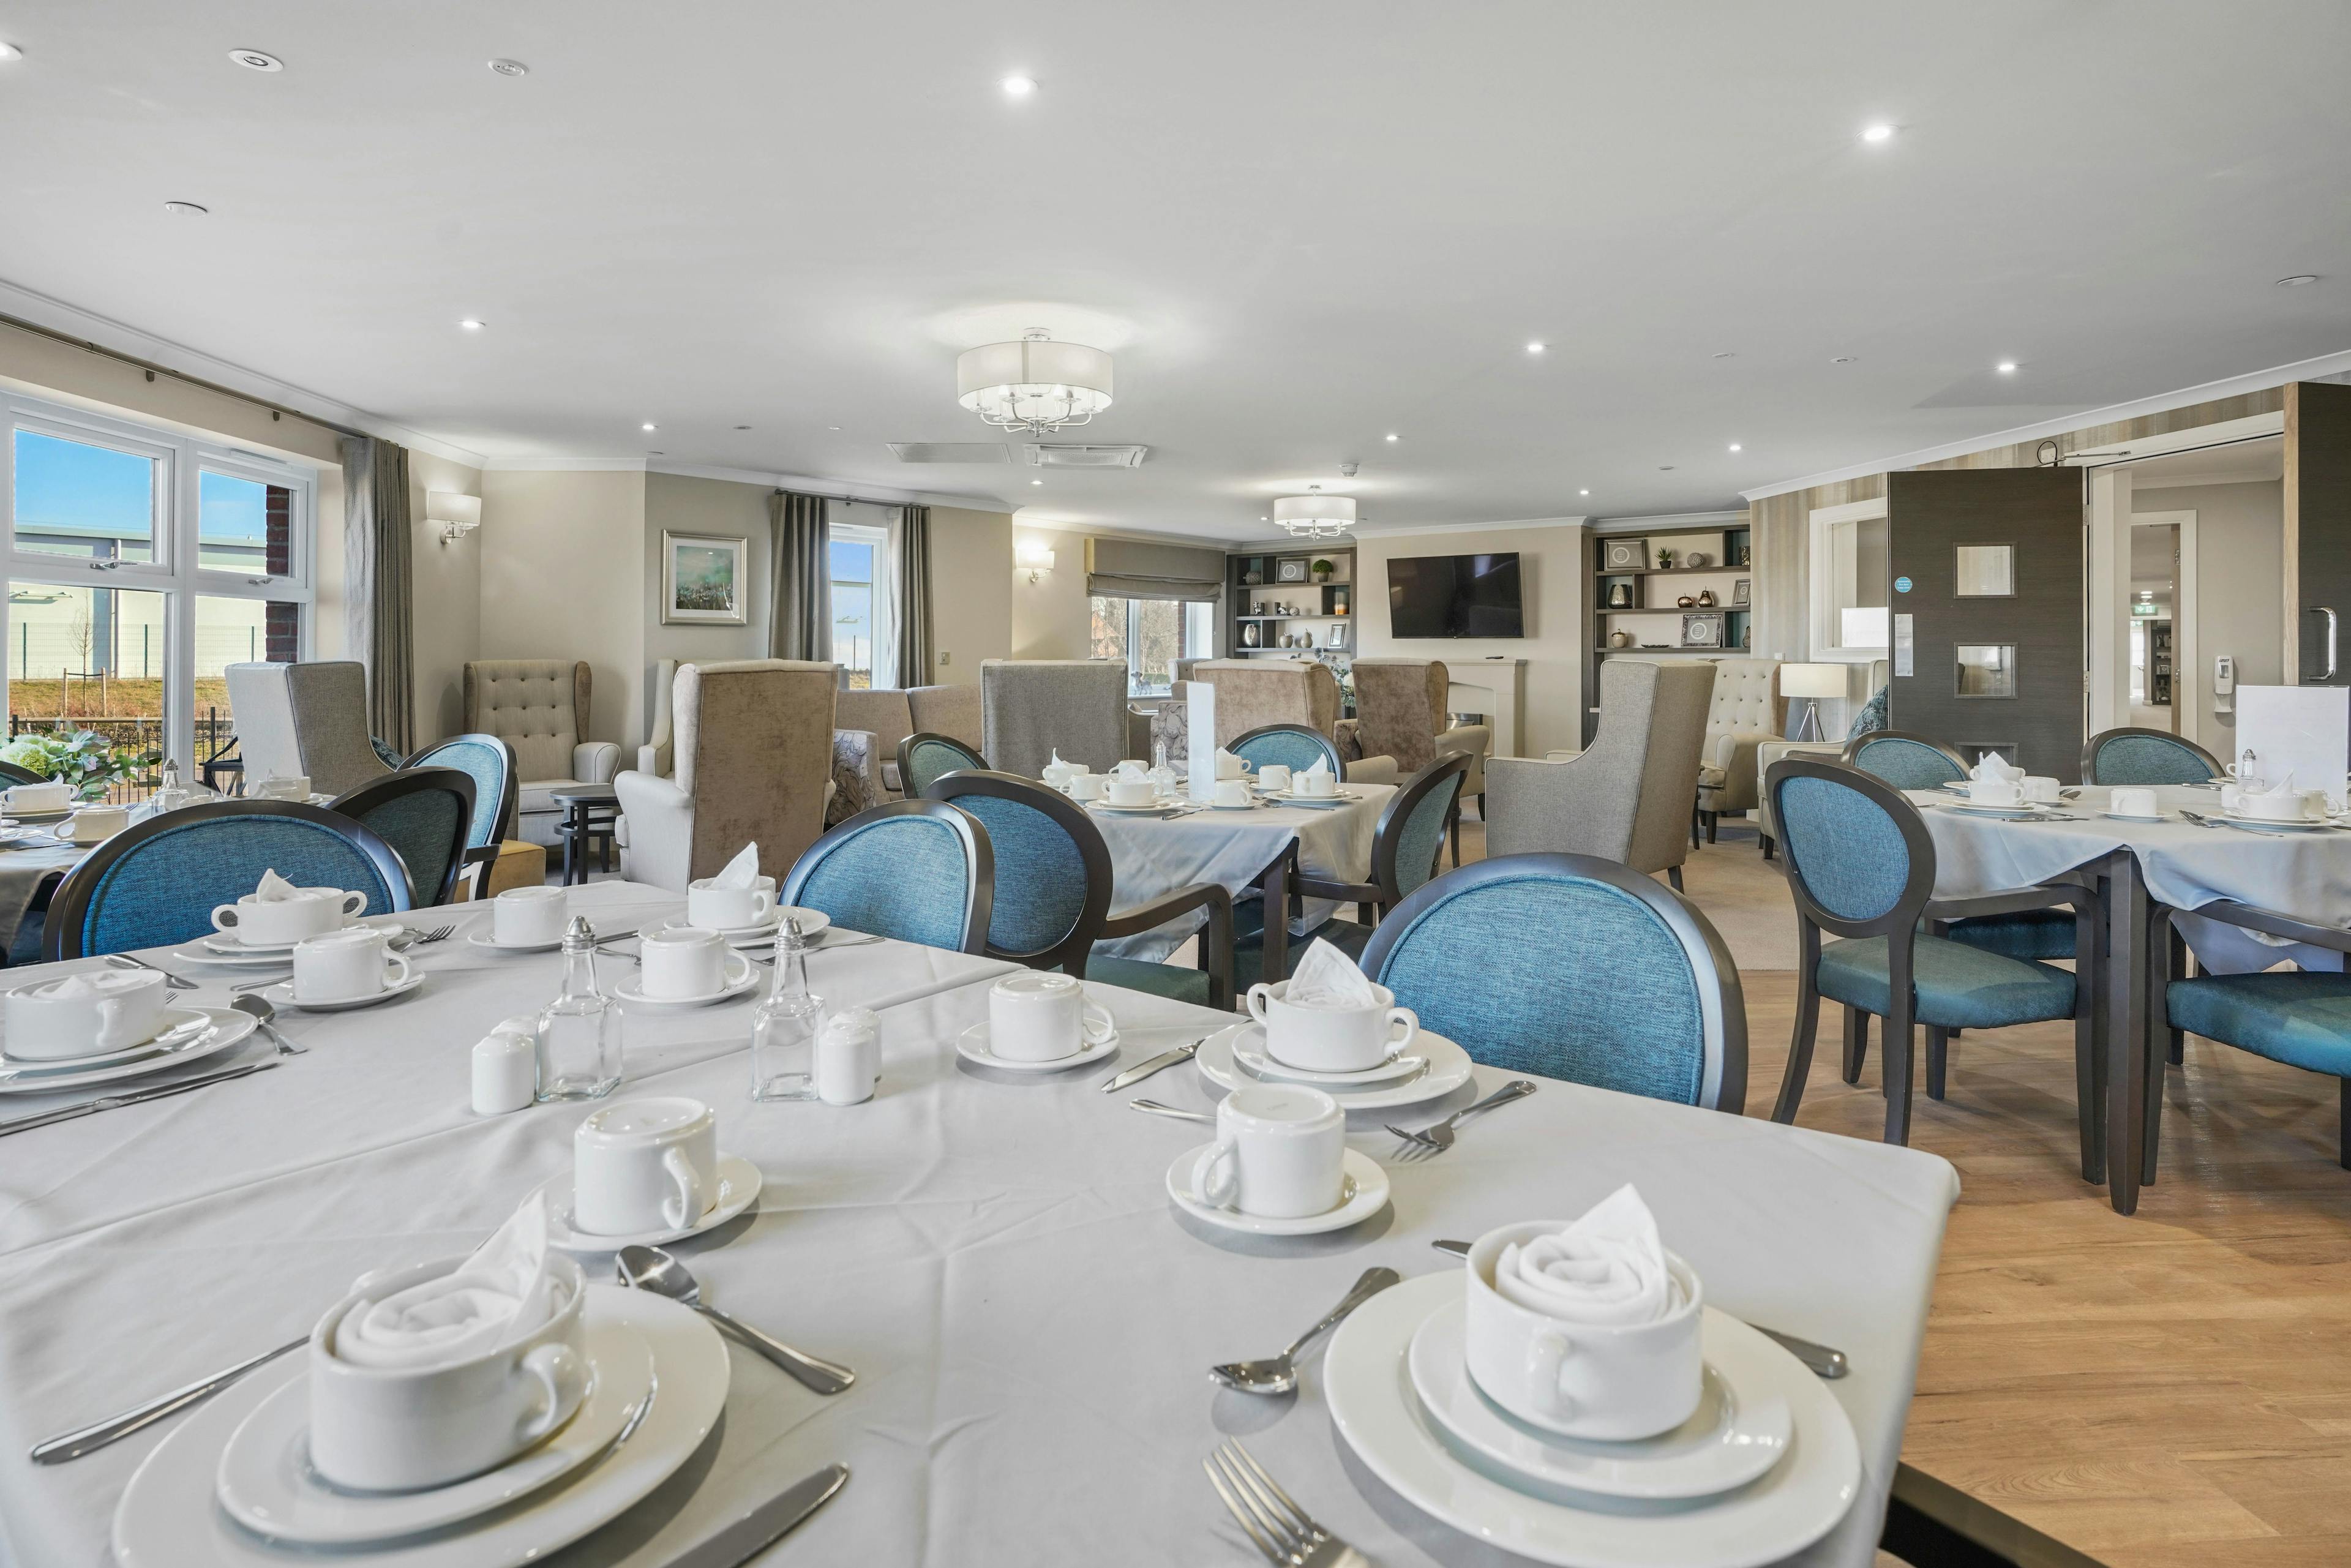 Dining room of Cloverleaf care home in Lincoln, Lincolnshire